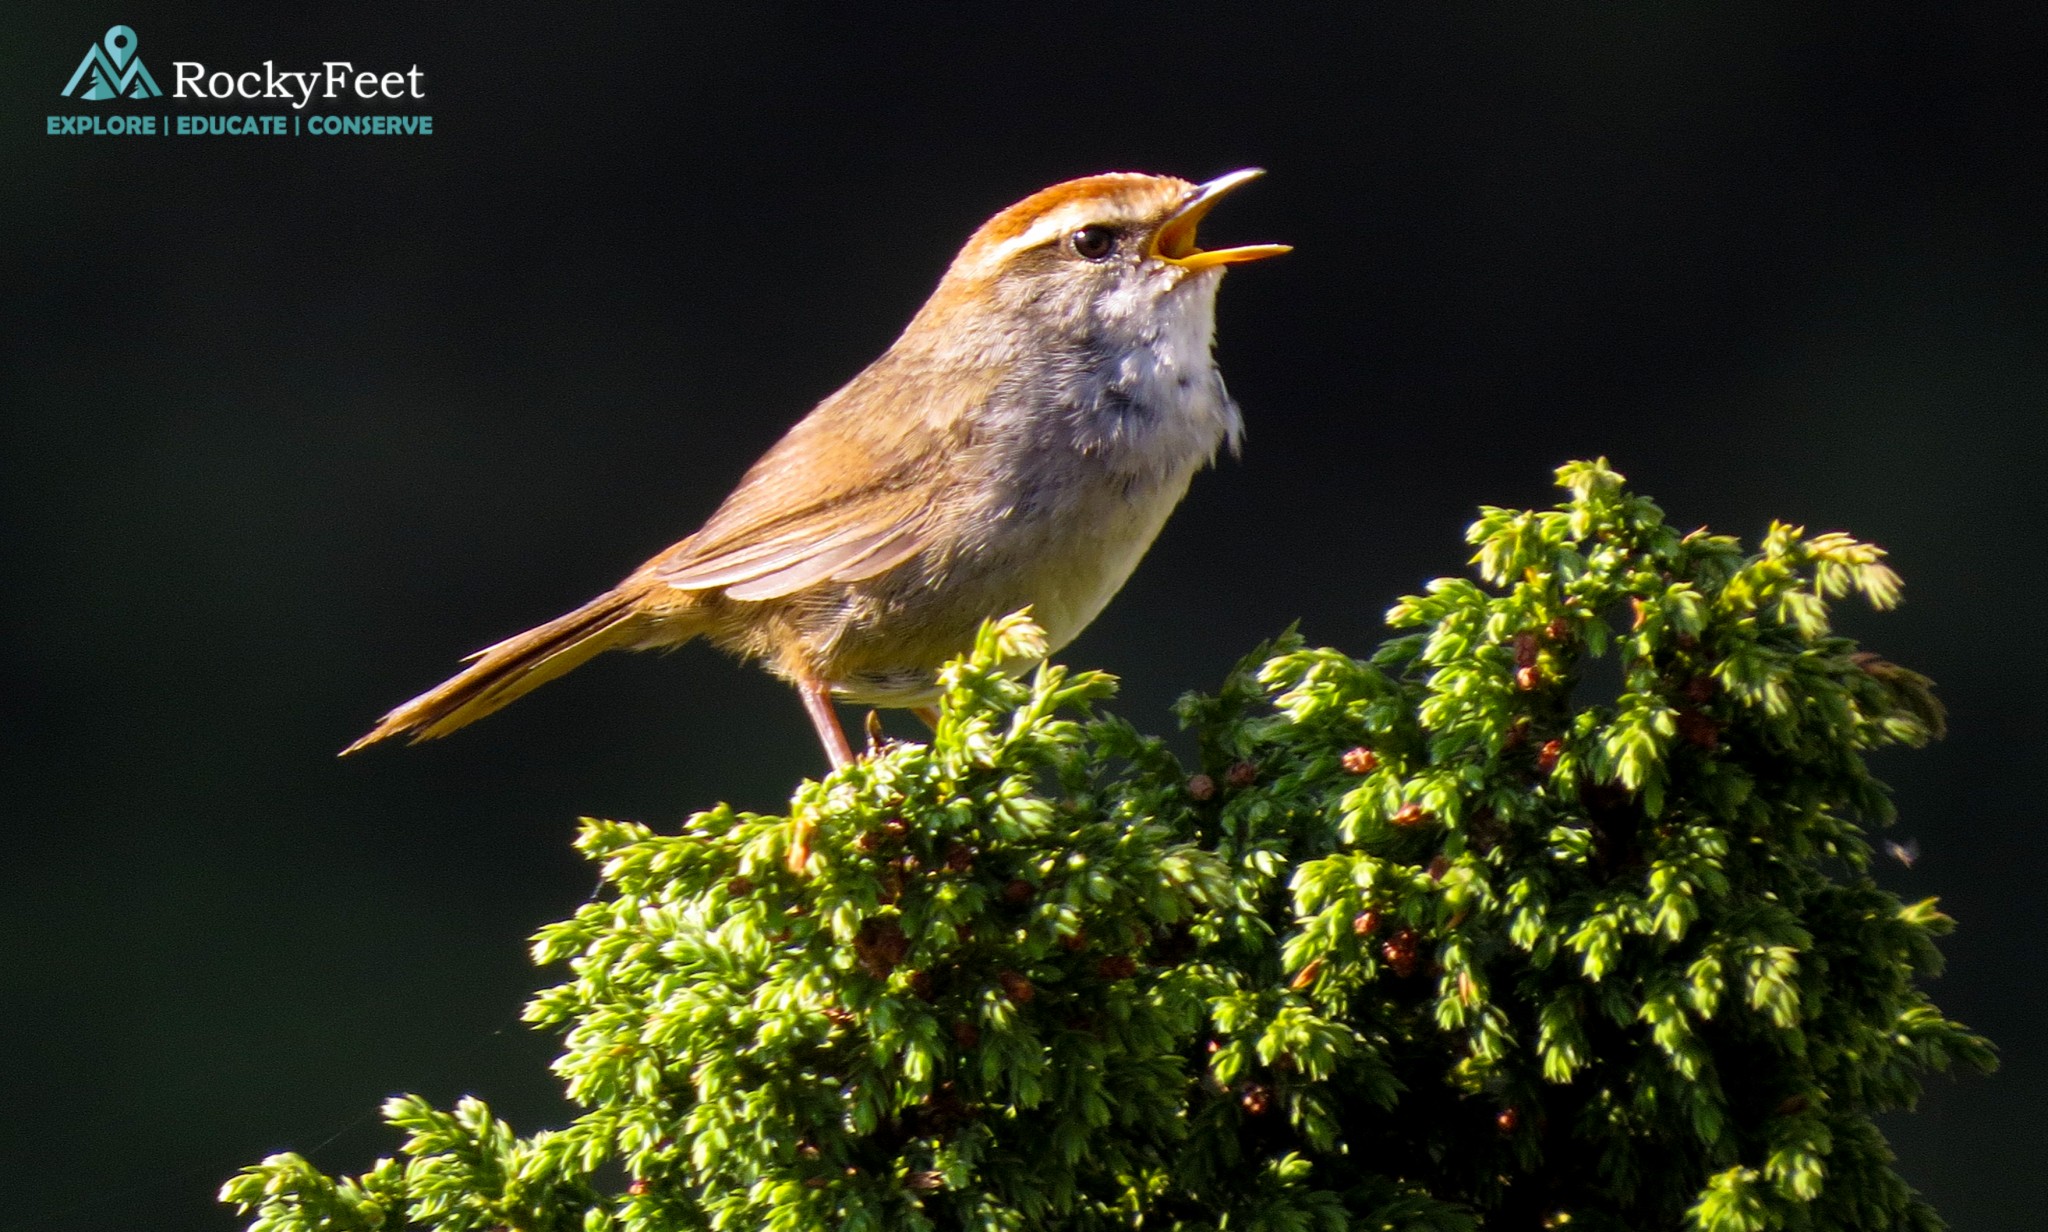 A Grey-sided Bush Warbler, a tiny shouter calling away from its perch on a Juniper. Taken on a beautiful morning at Mandani Valley on Day 6.